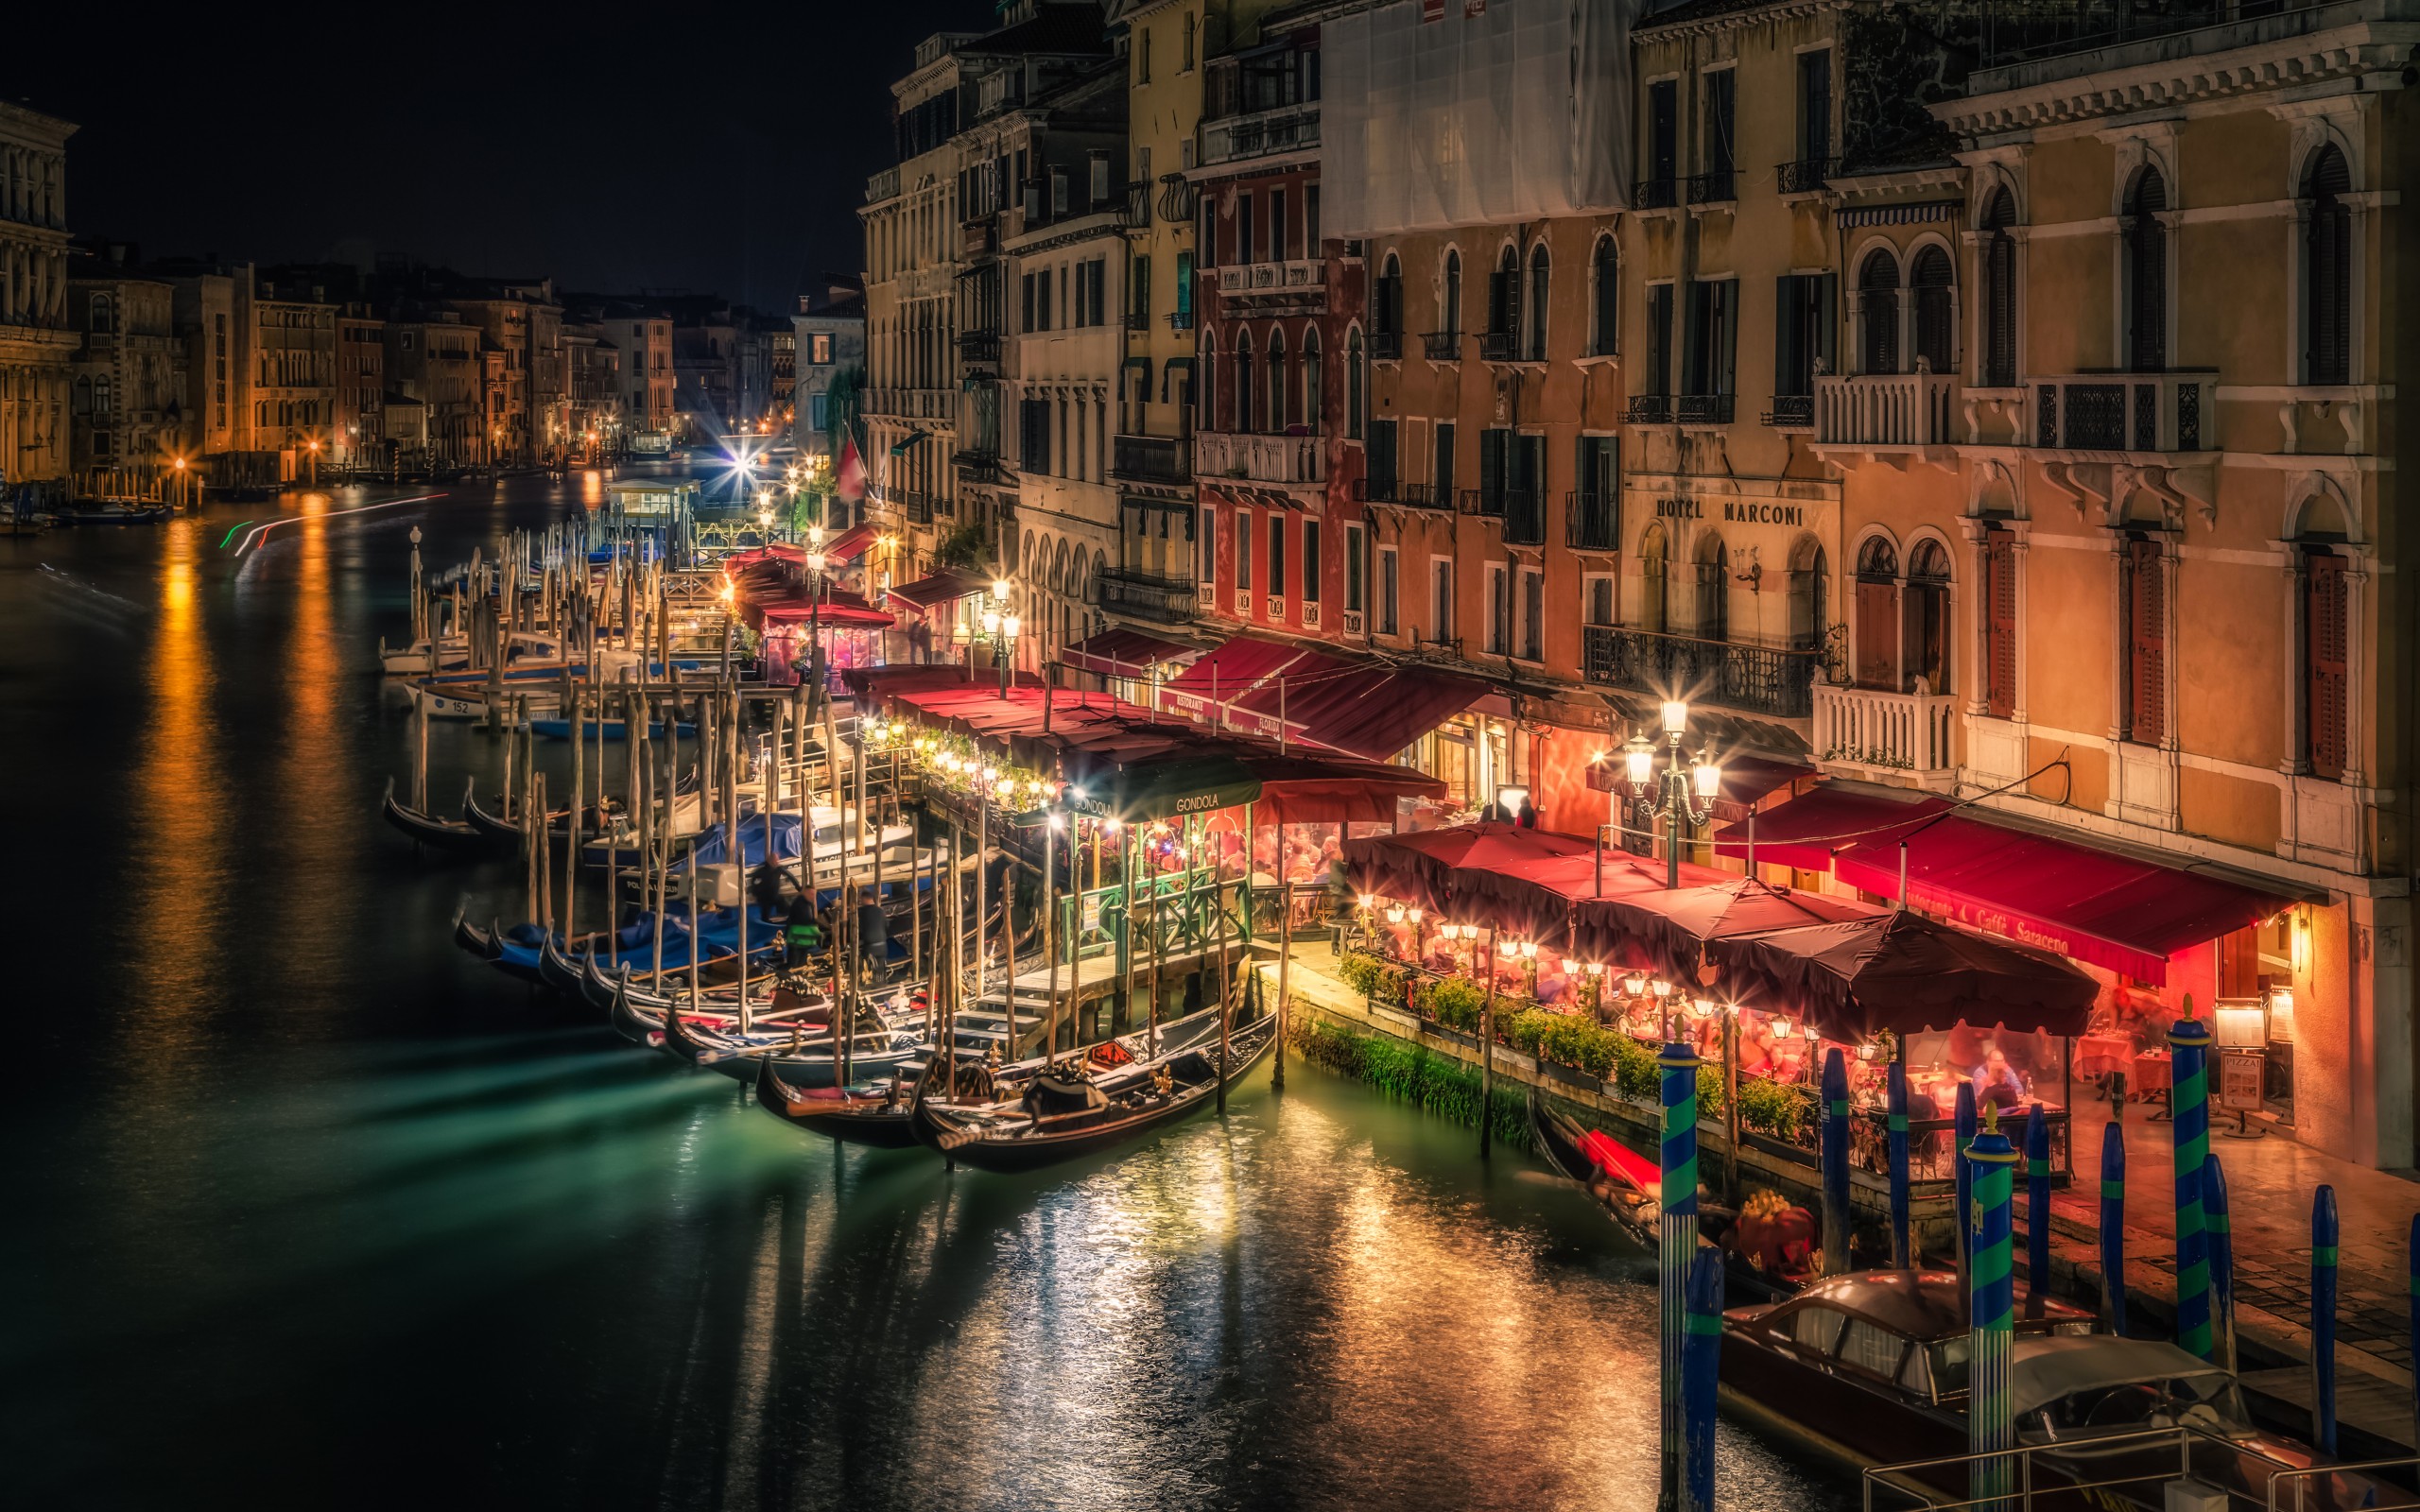 venice, man made, boat, building, canal, evening, gondola, night, town, cities 1080p